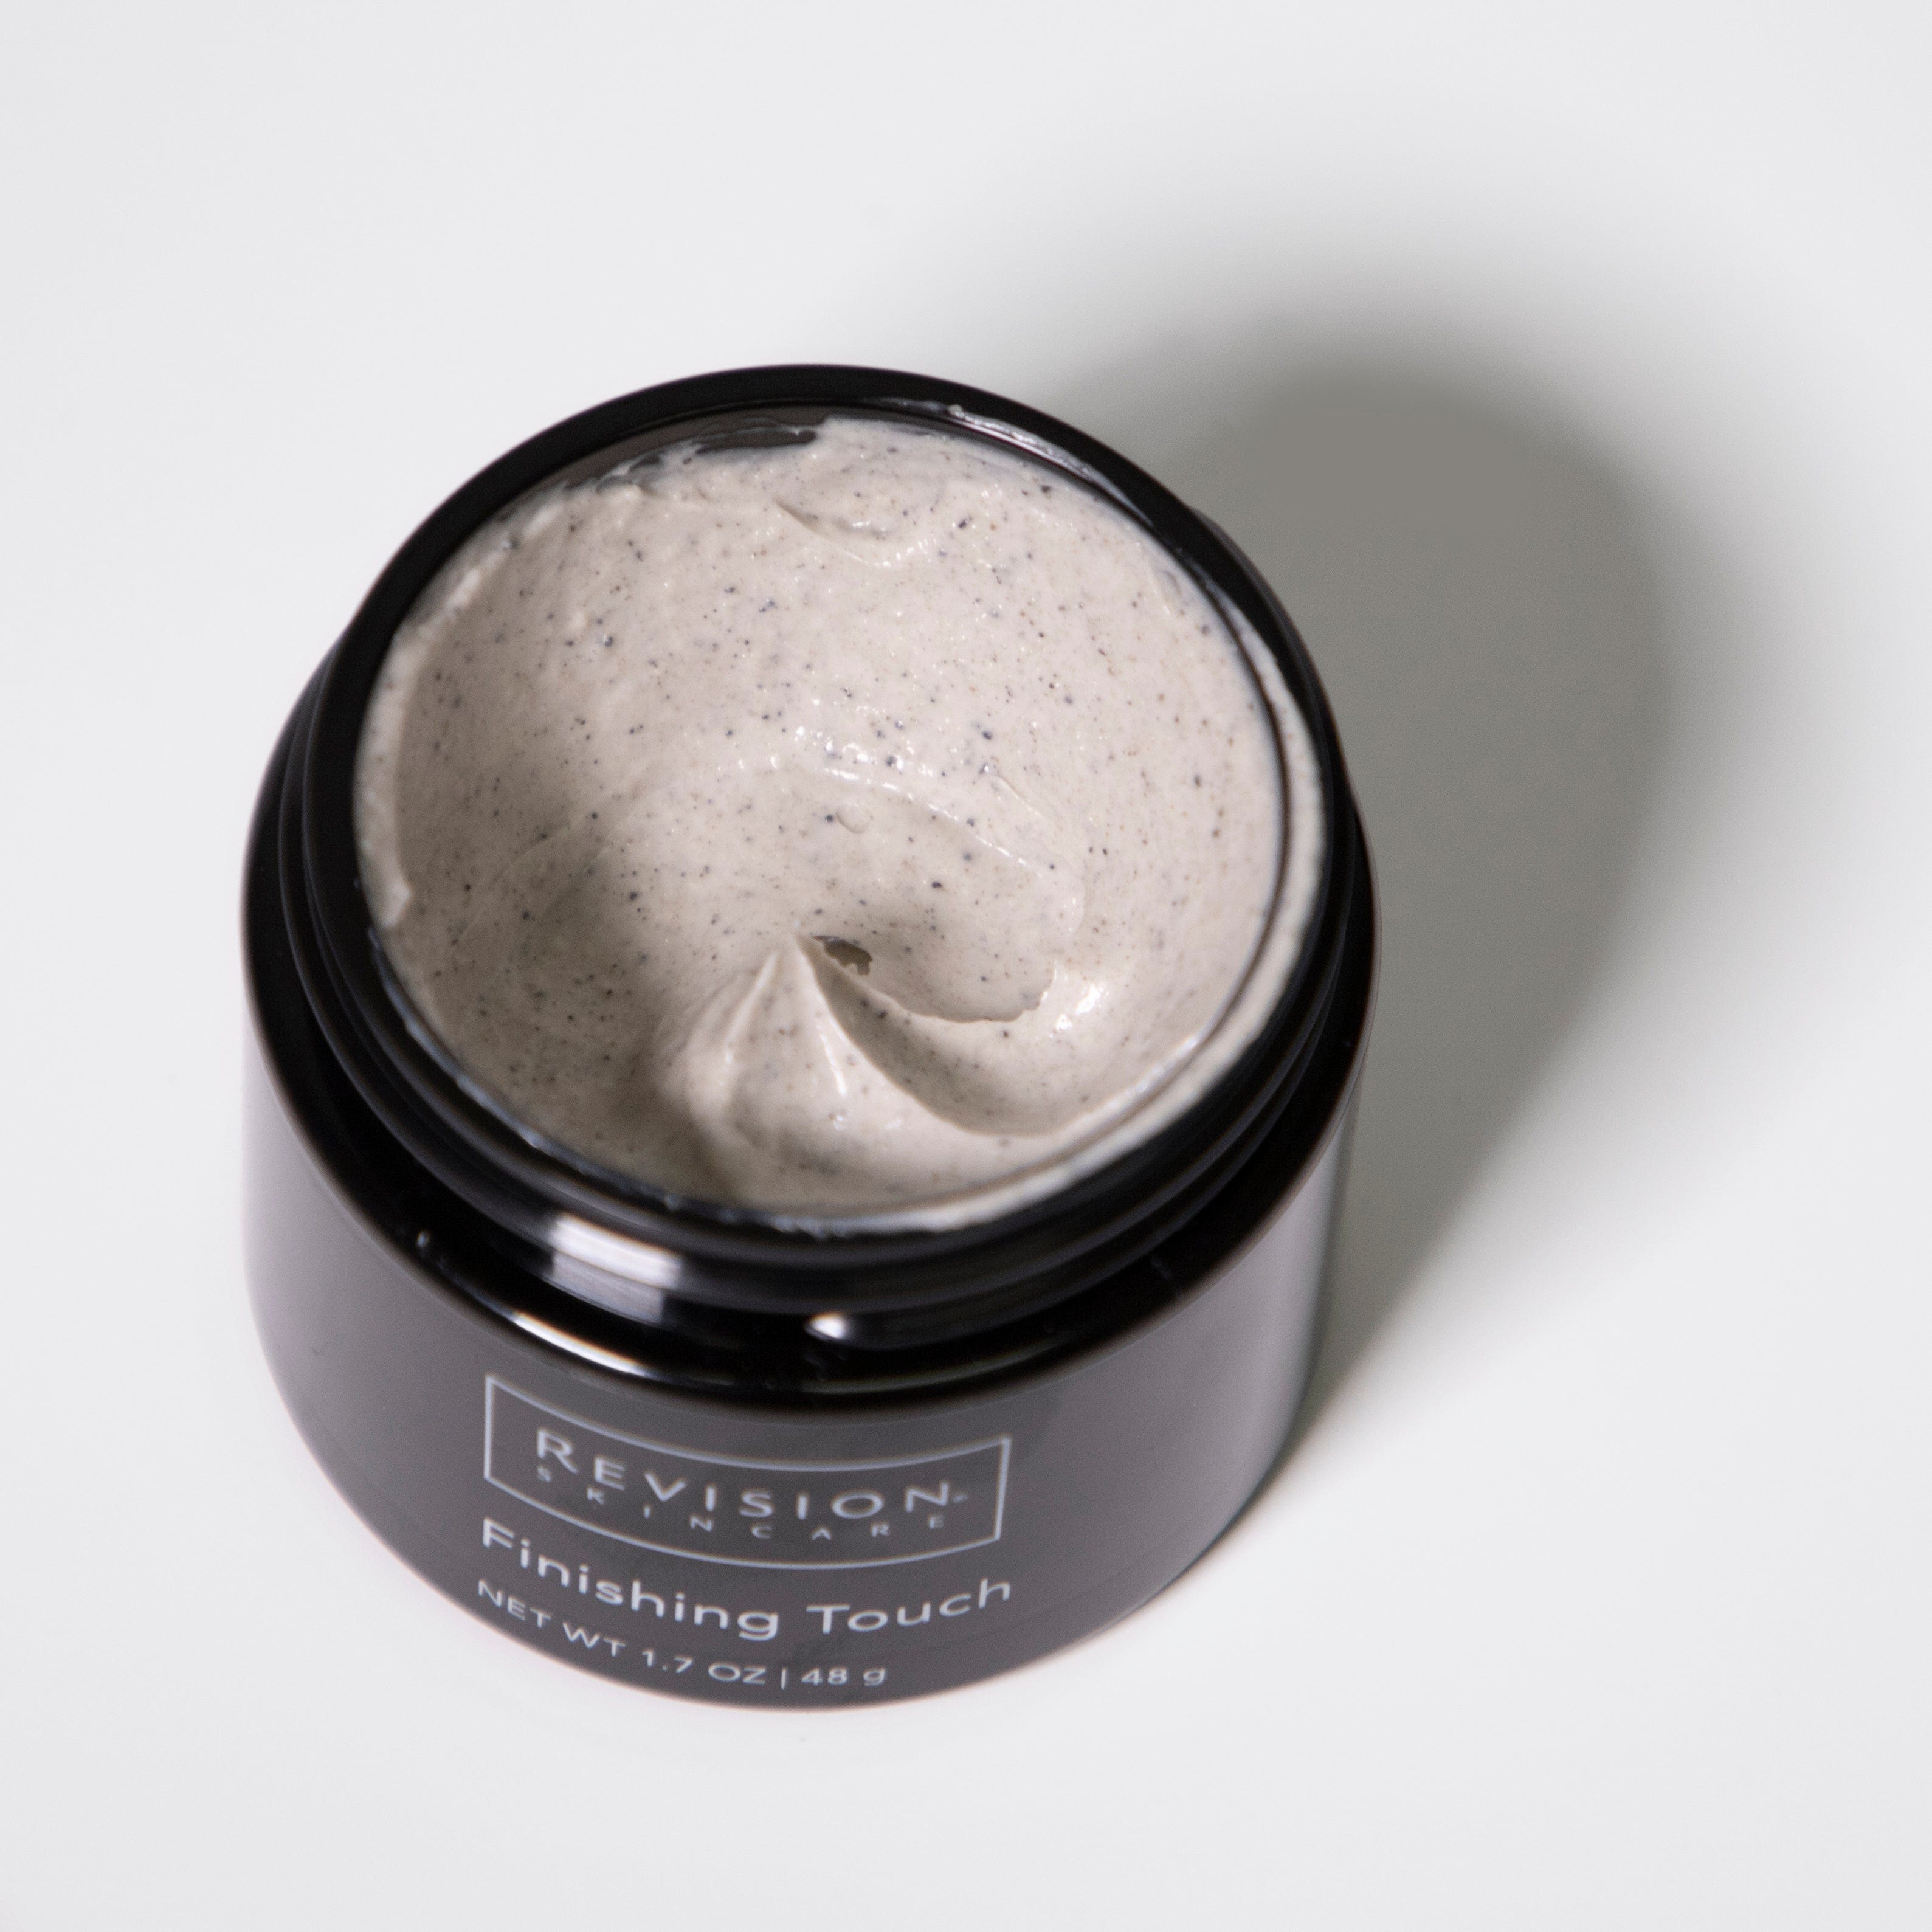 Finishing Touch- microdermabrasion scrub for polished skin. Jar Open